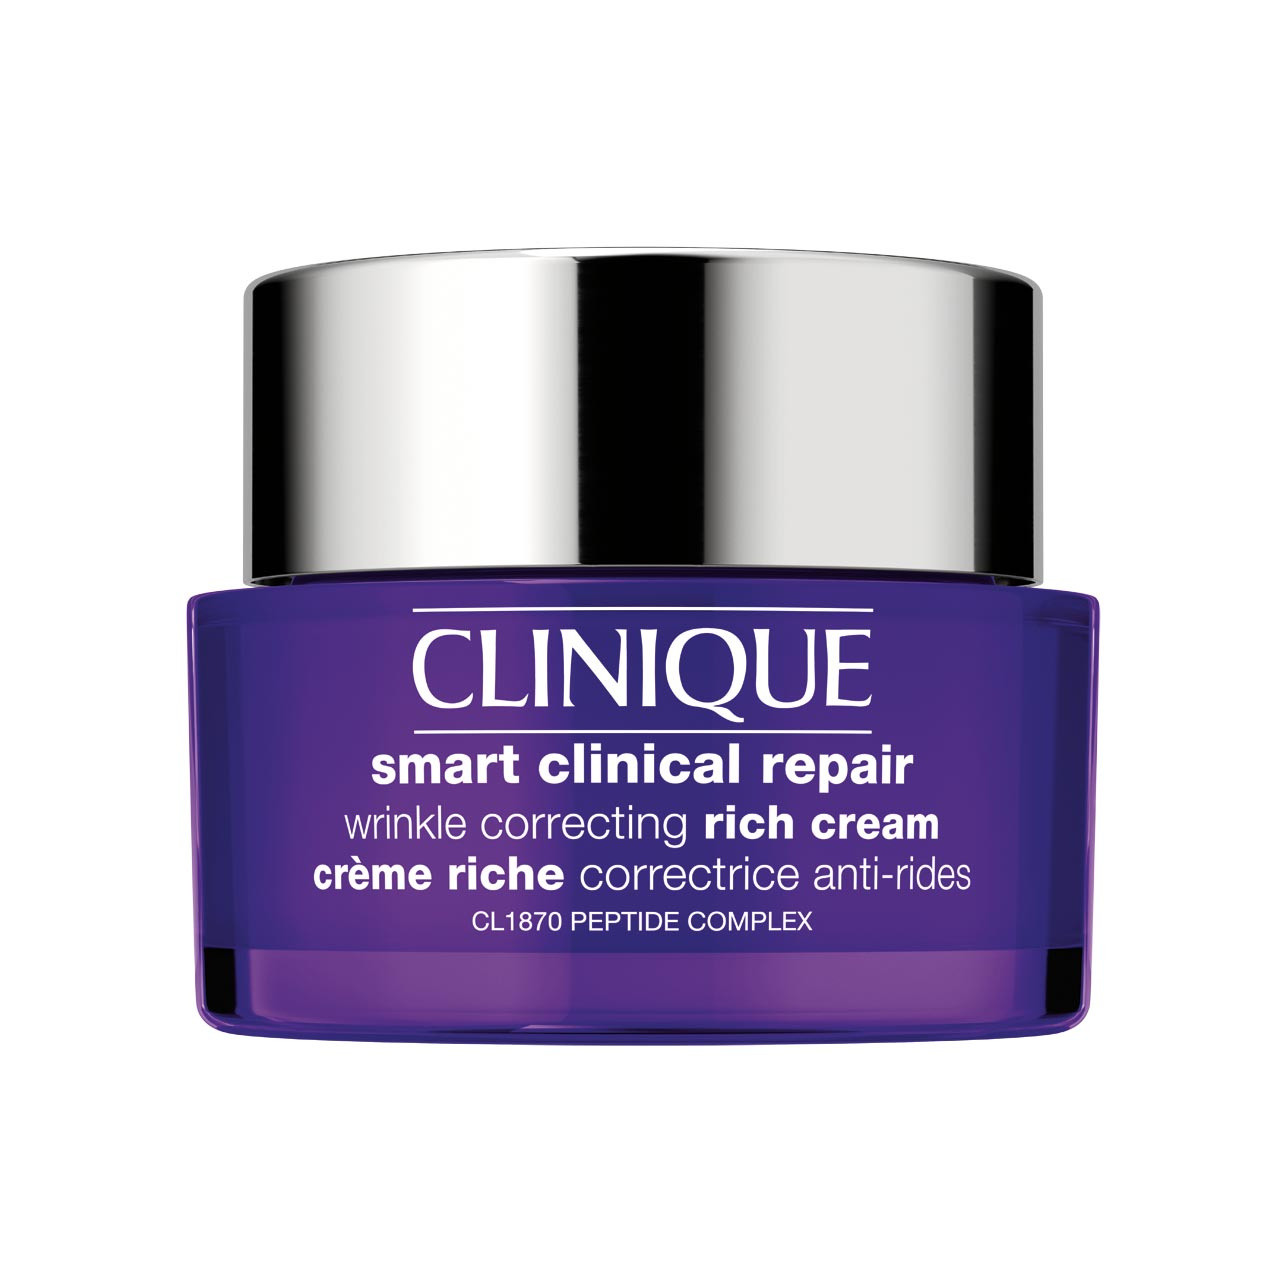 Smart clinical repair wrinkle correcting cream - all skin types, Viola, large image number 0